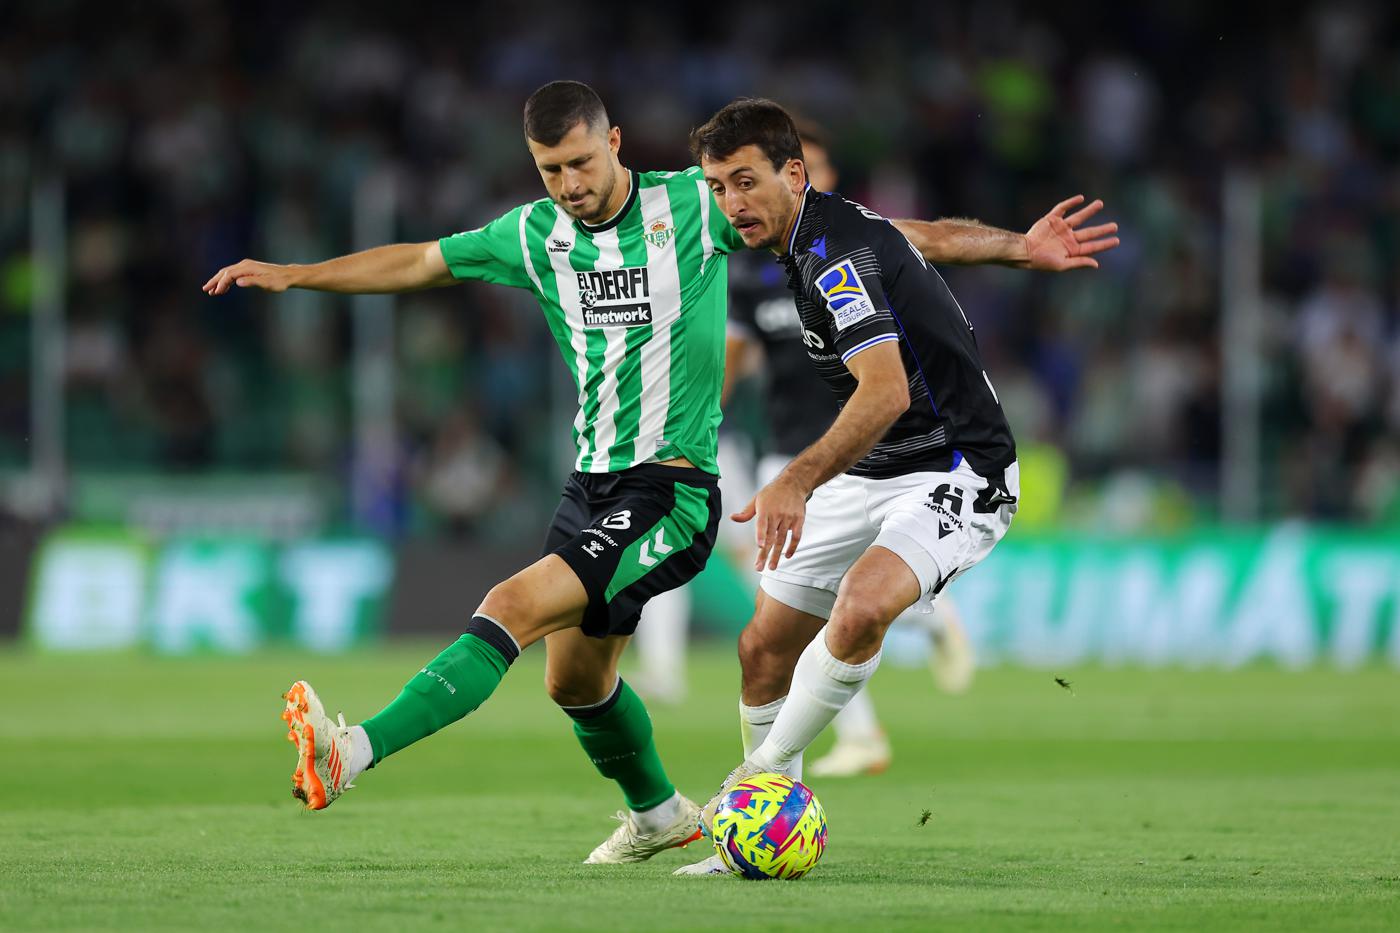 Betis - Real Madrid - 0:0. Spain Championship, round 31. Match review, statistics.